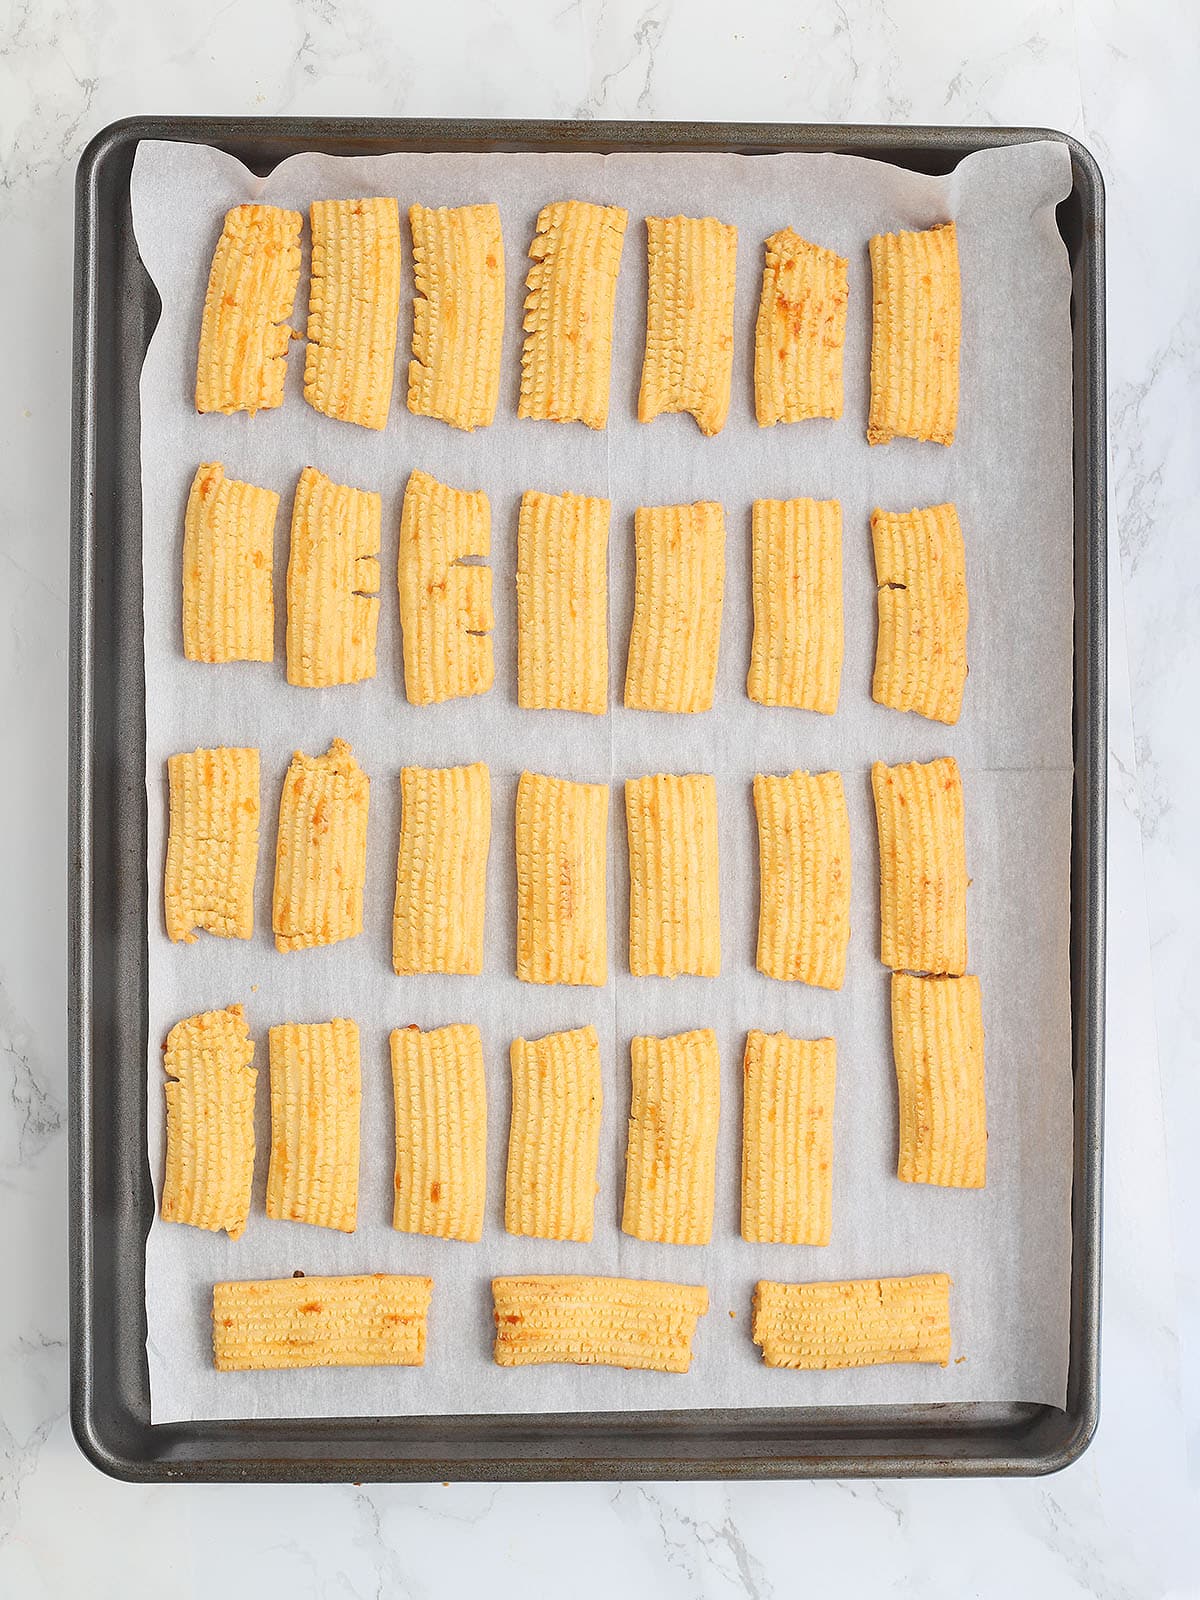 baked cheese straws cooling on a baking sheet.